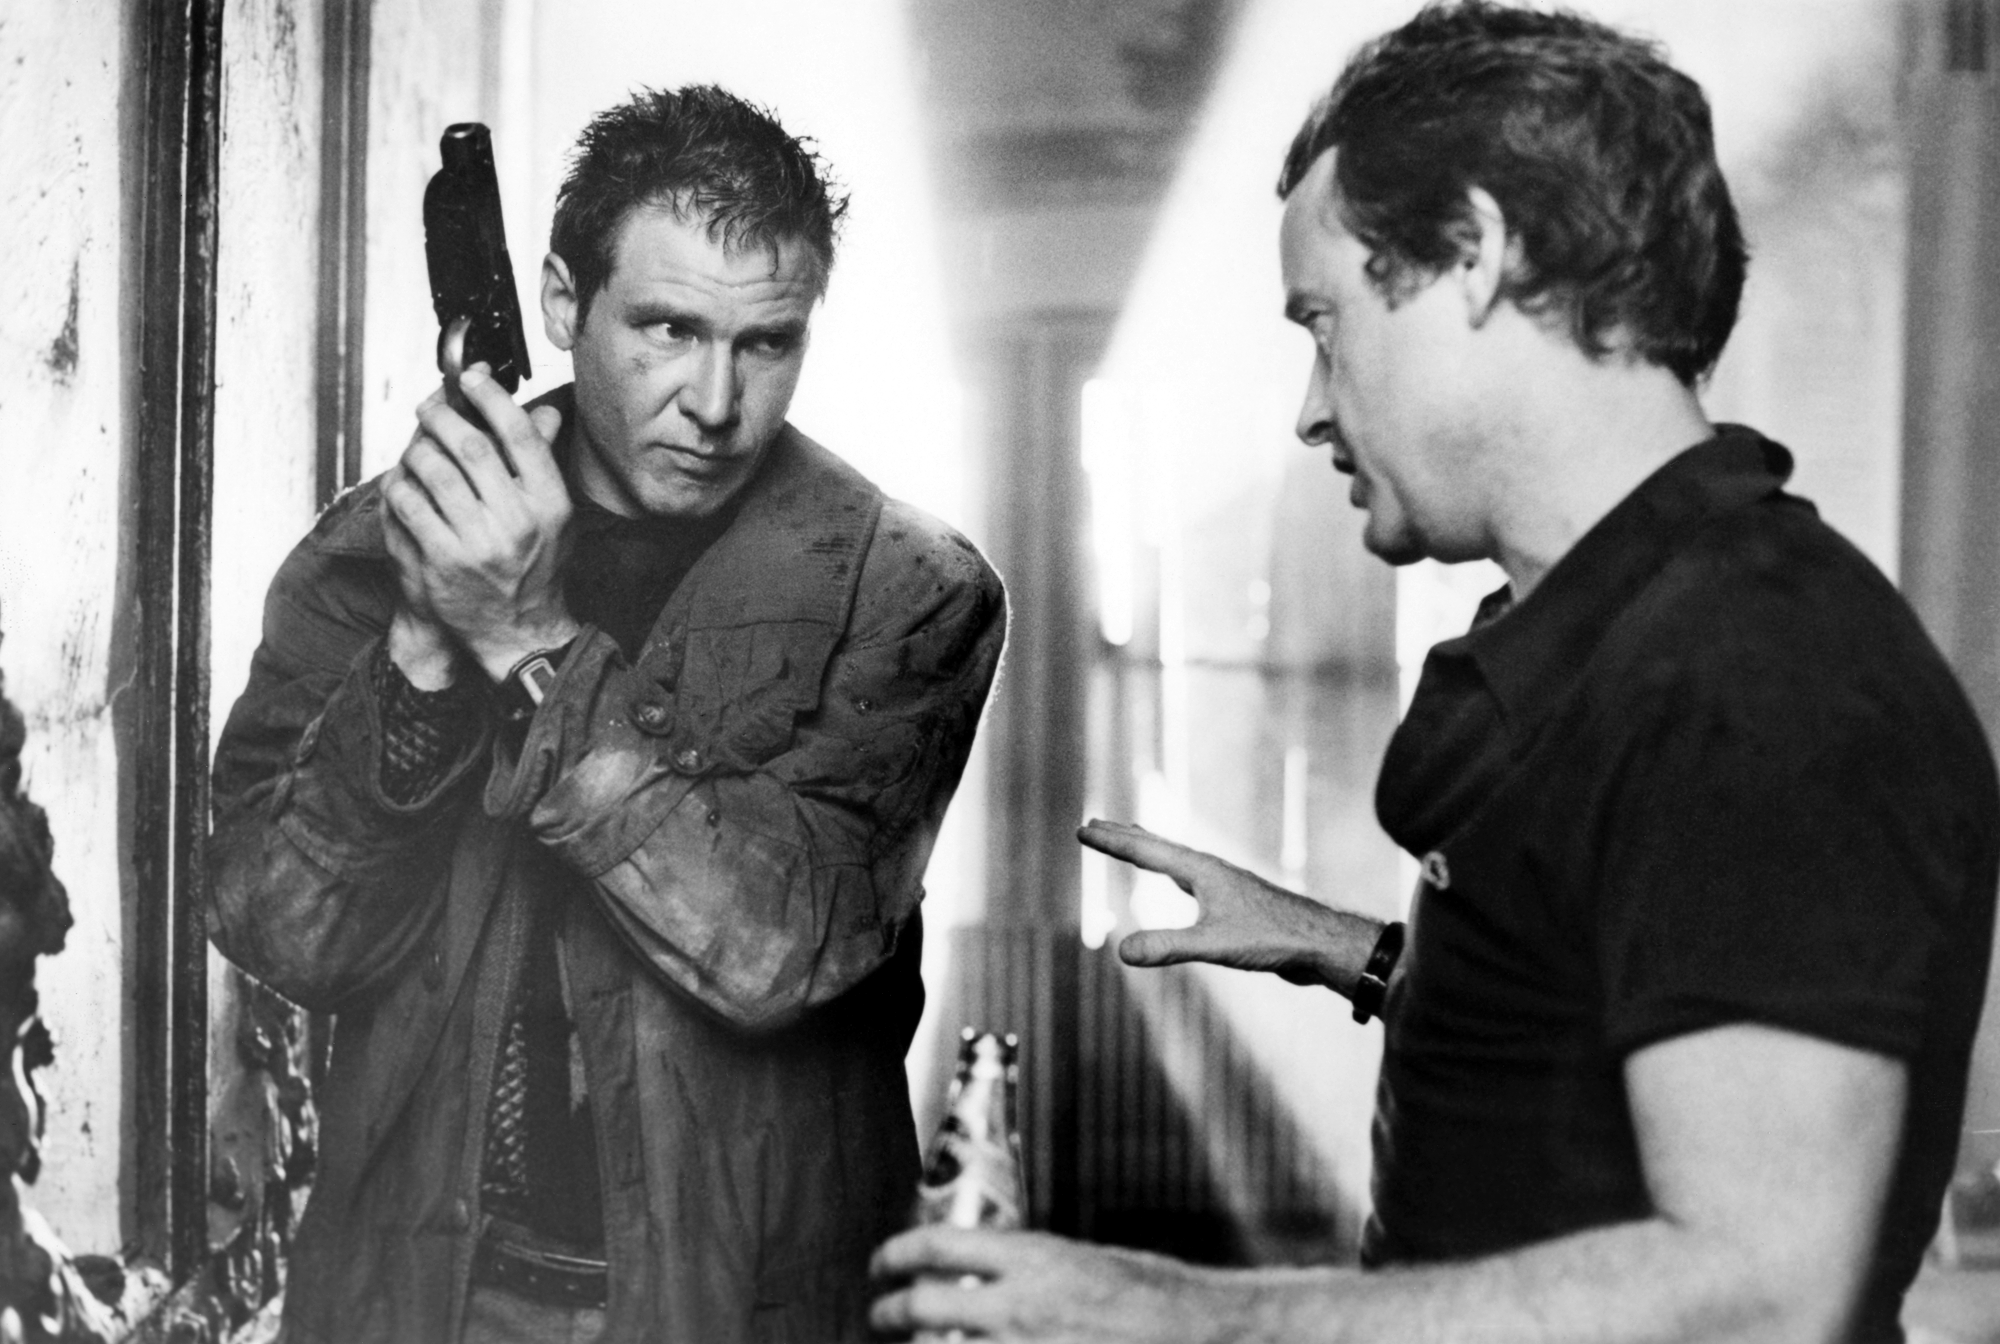 Ridley Scott’s ‘Blade Runner’: A Game-Changing Science-Fiction Classic